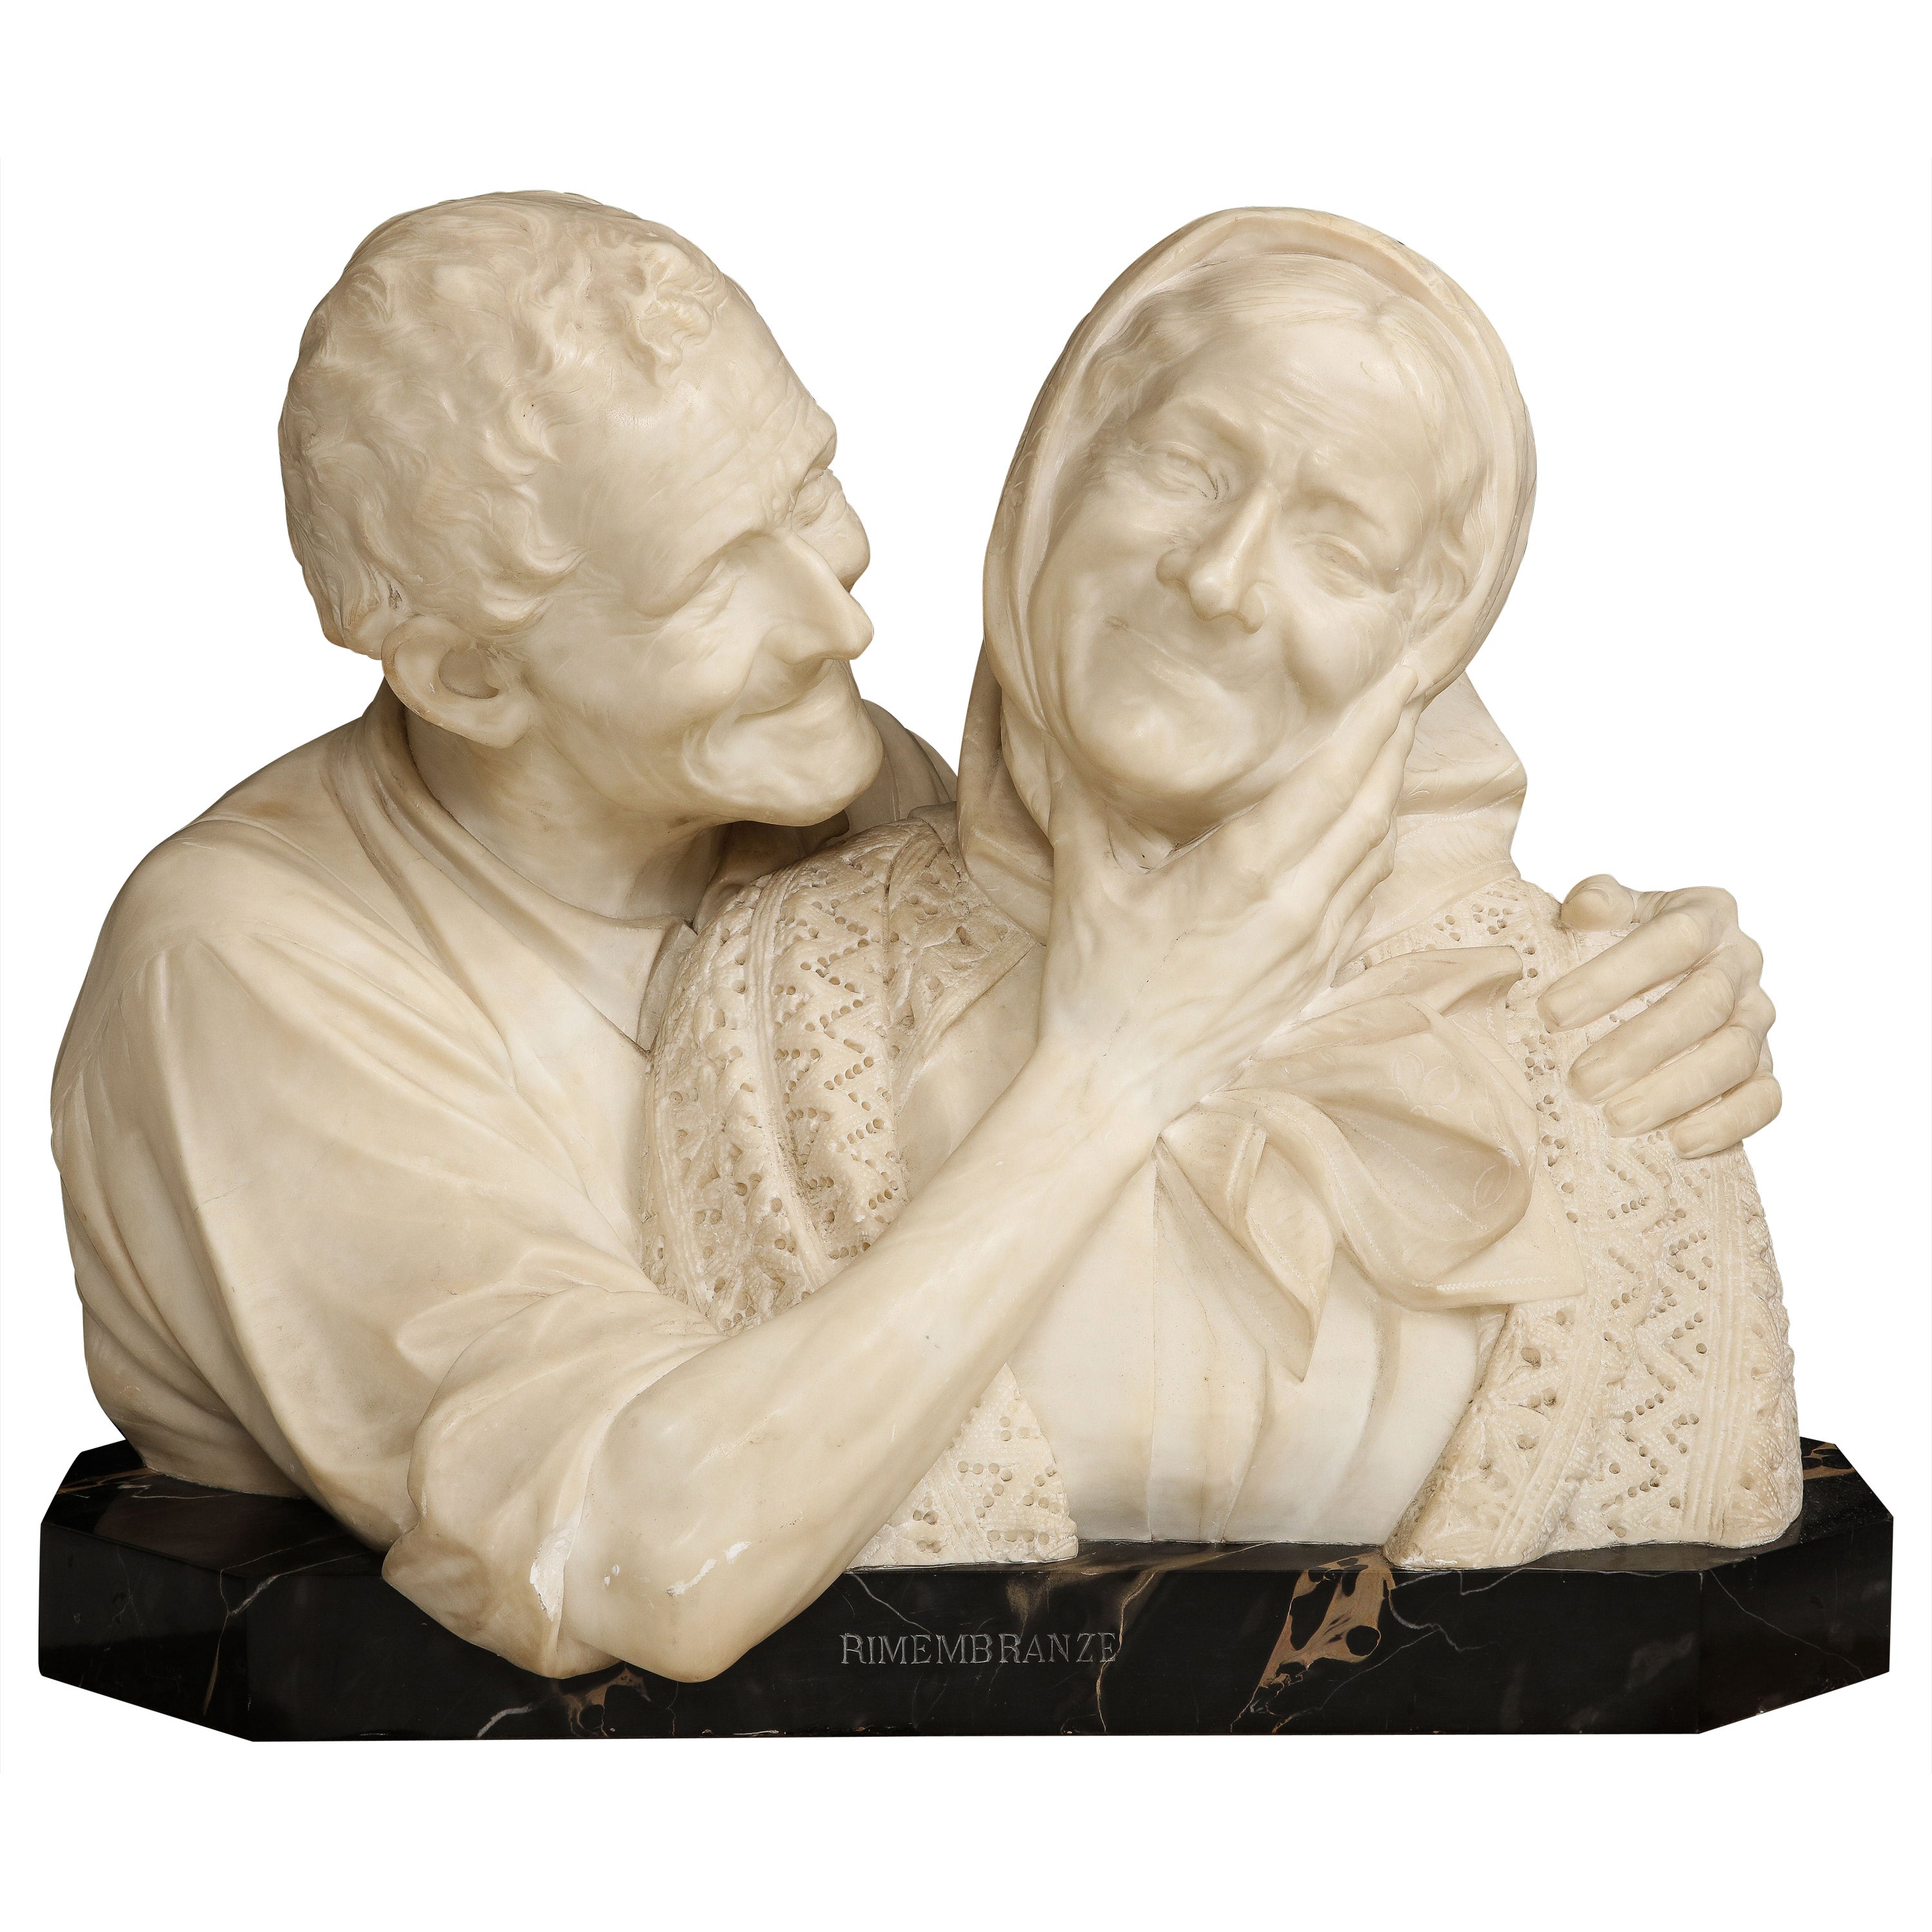 Italian Marble Bust of The Grandparents, Titled: Rimembranze, Signed Vichi For Sale